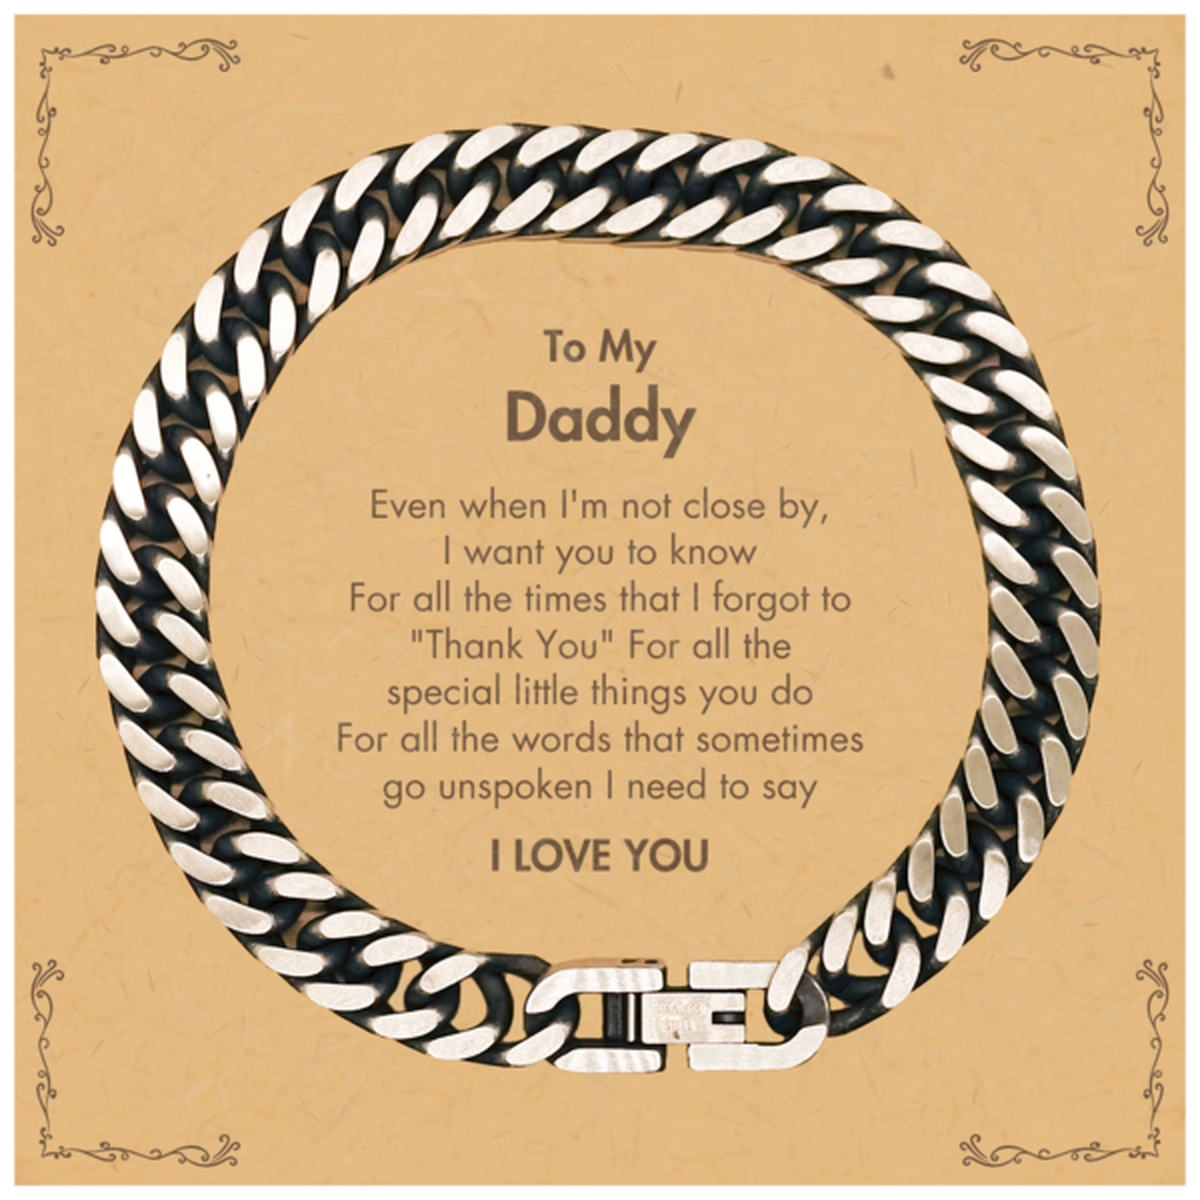 Thank You Gifts for Daddy, Keepsake Cuban Link Chain Bracelet Gifts for Daddy Birthday Mother's day Father's Day Daddy For all the words That sometimes go unspoken I need to say I LOVE YOU